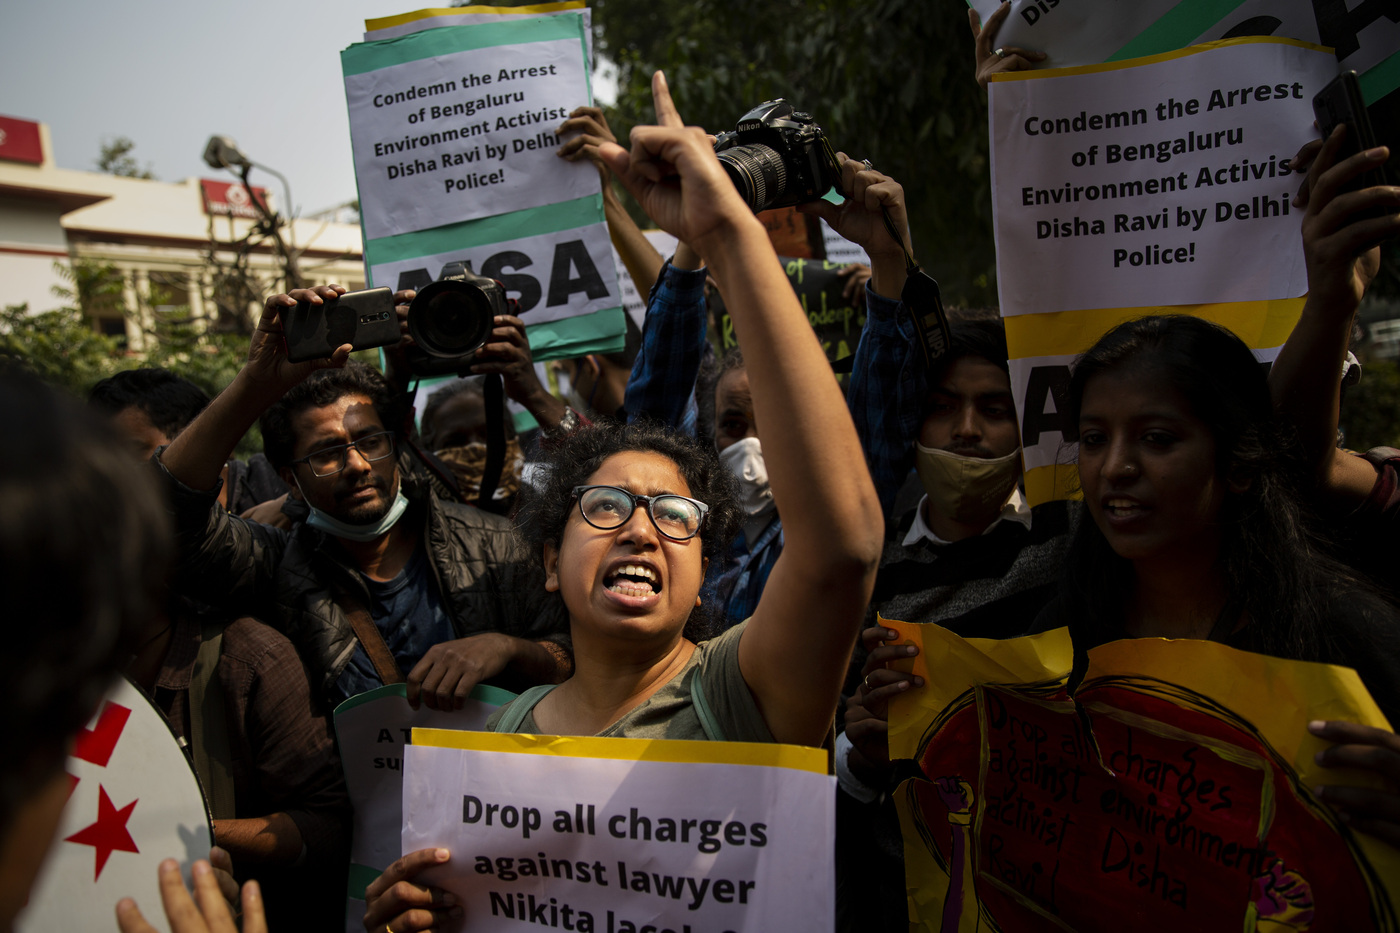 Indian students hold placards and shout slogans condemning police action against various activists during a protest in New Delhi, India, Tuesday, Feb. 16, 2021. Police on Saturday arrested climate activist Disha Ravi, for circulating a document on social media supporting months of massive protests by farmers. Police also issued arrest warrants for two other activists, Nikita Jacob and Shantanu Muluk, saying the three created the document and shared it with others. According to police, the sharing of the document on social media indicated there was a “conspiracy” behind violence on Jan. 26, India's Republic Day, when the largely peaceful farmer protests erupted into clashes with police. (AP Photo/Altaf Qadri)